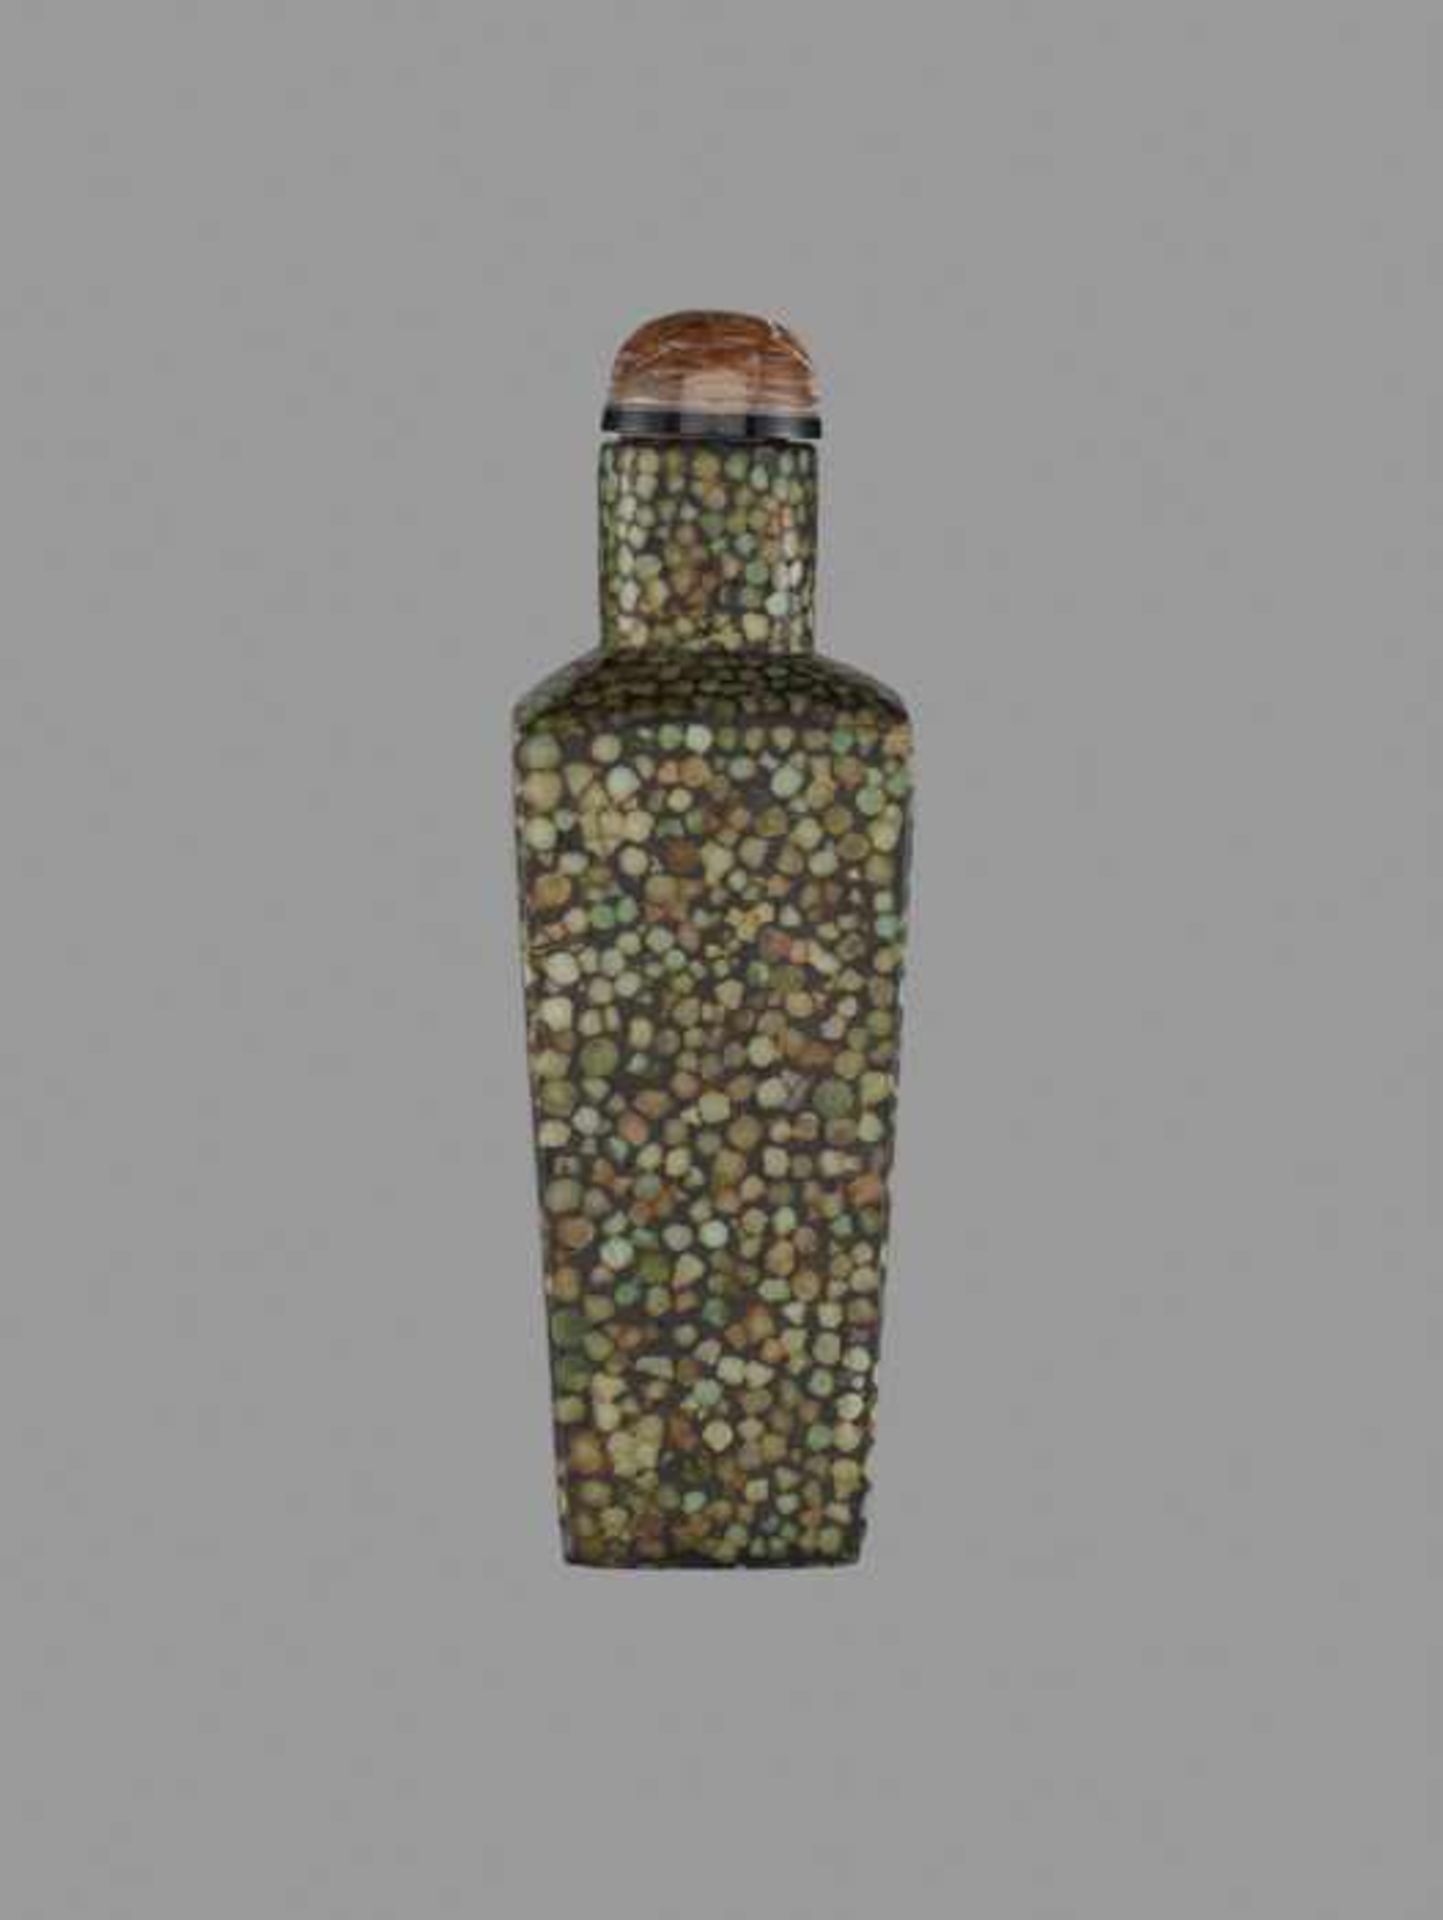 A SHAGREEN SNUFF BOTTLE, QING DYNASTY Shagreen (sometimes called sharkskin among collectors, but